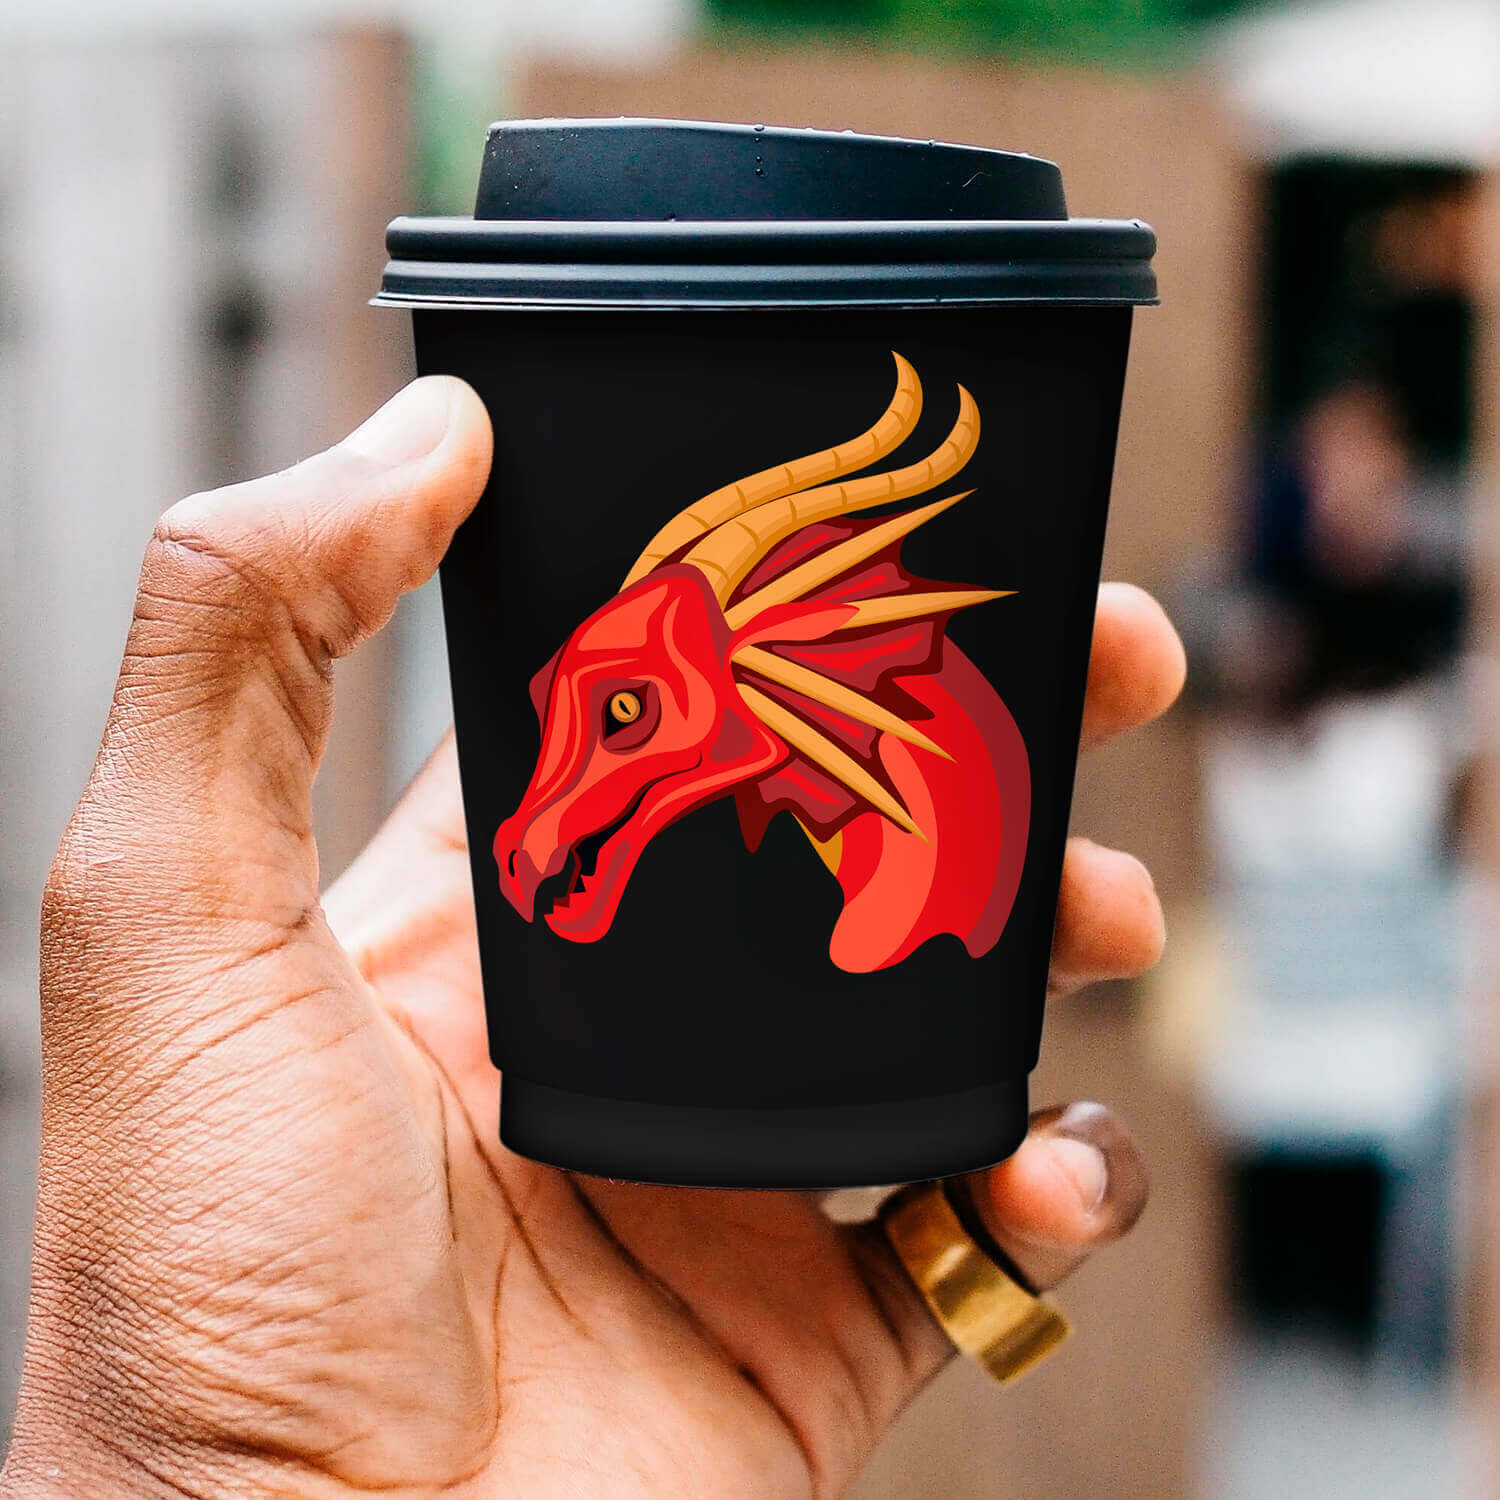 Hand holding a black cup with a red horse on it.